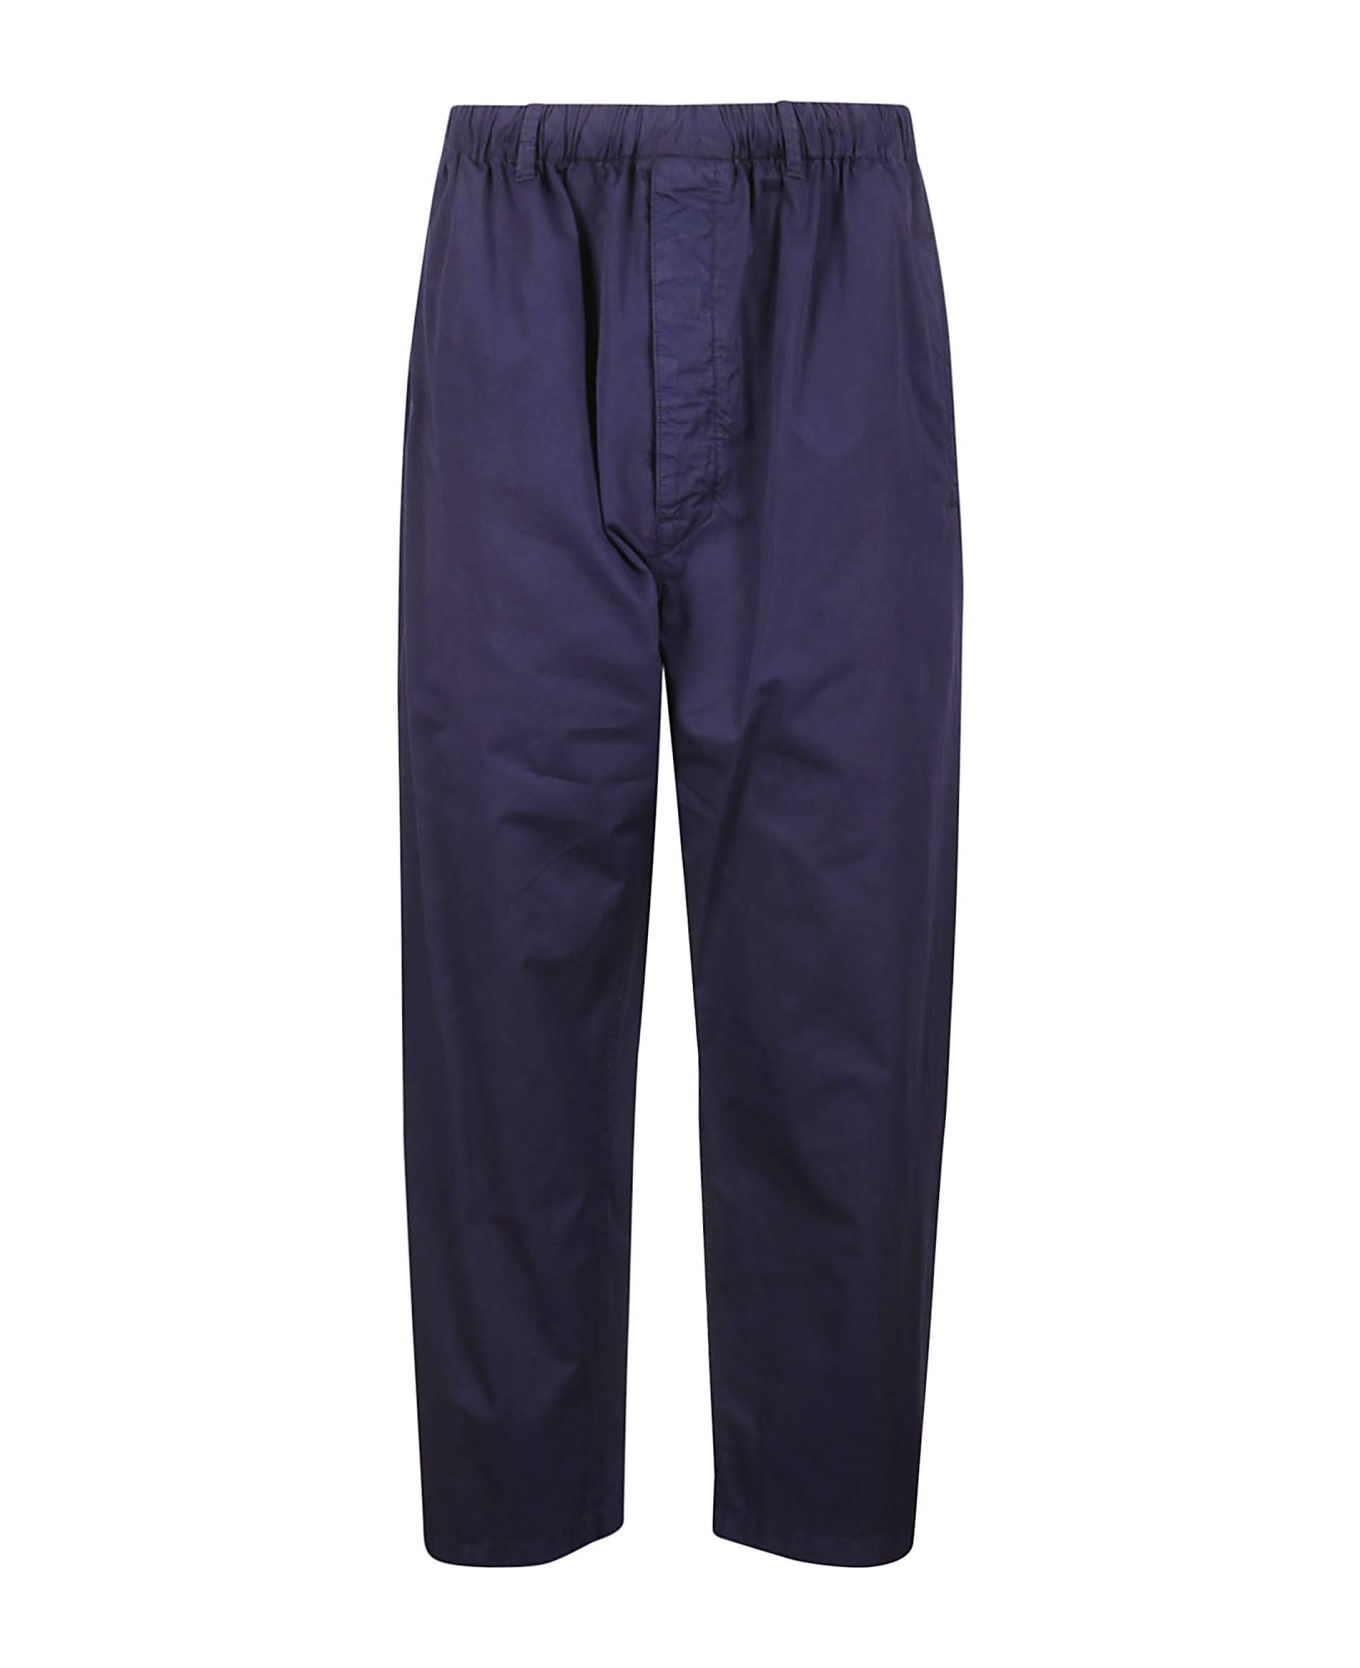 Lemaire Relaxed Pants - BLUE VIOLET ボトムス